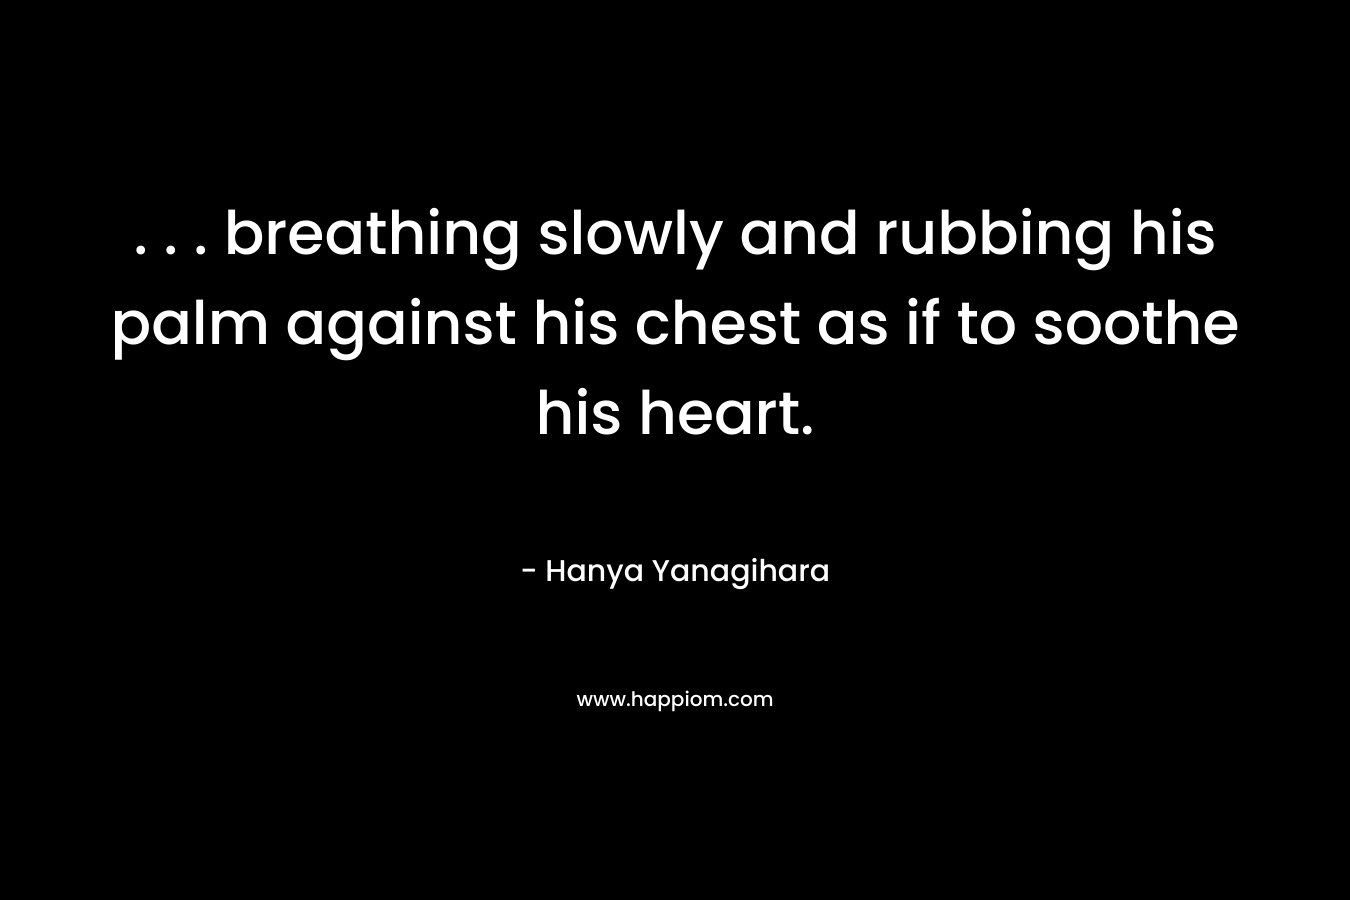 . . . breathing slowly and rubbing his palm against his chest as if to soothe his heart. – Hanya Yanagihara